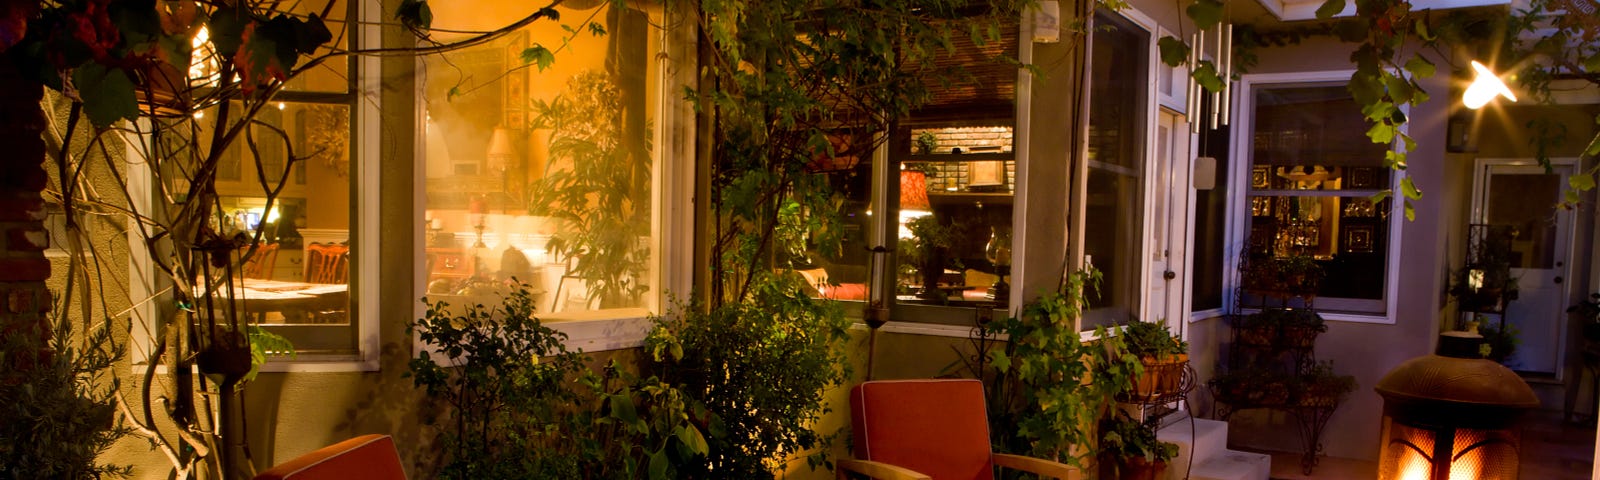 An evening Patio with a glowing warm light from the window